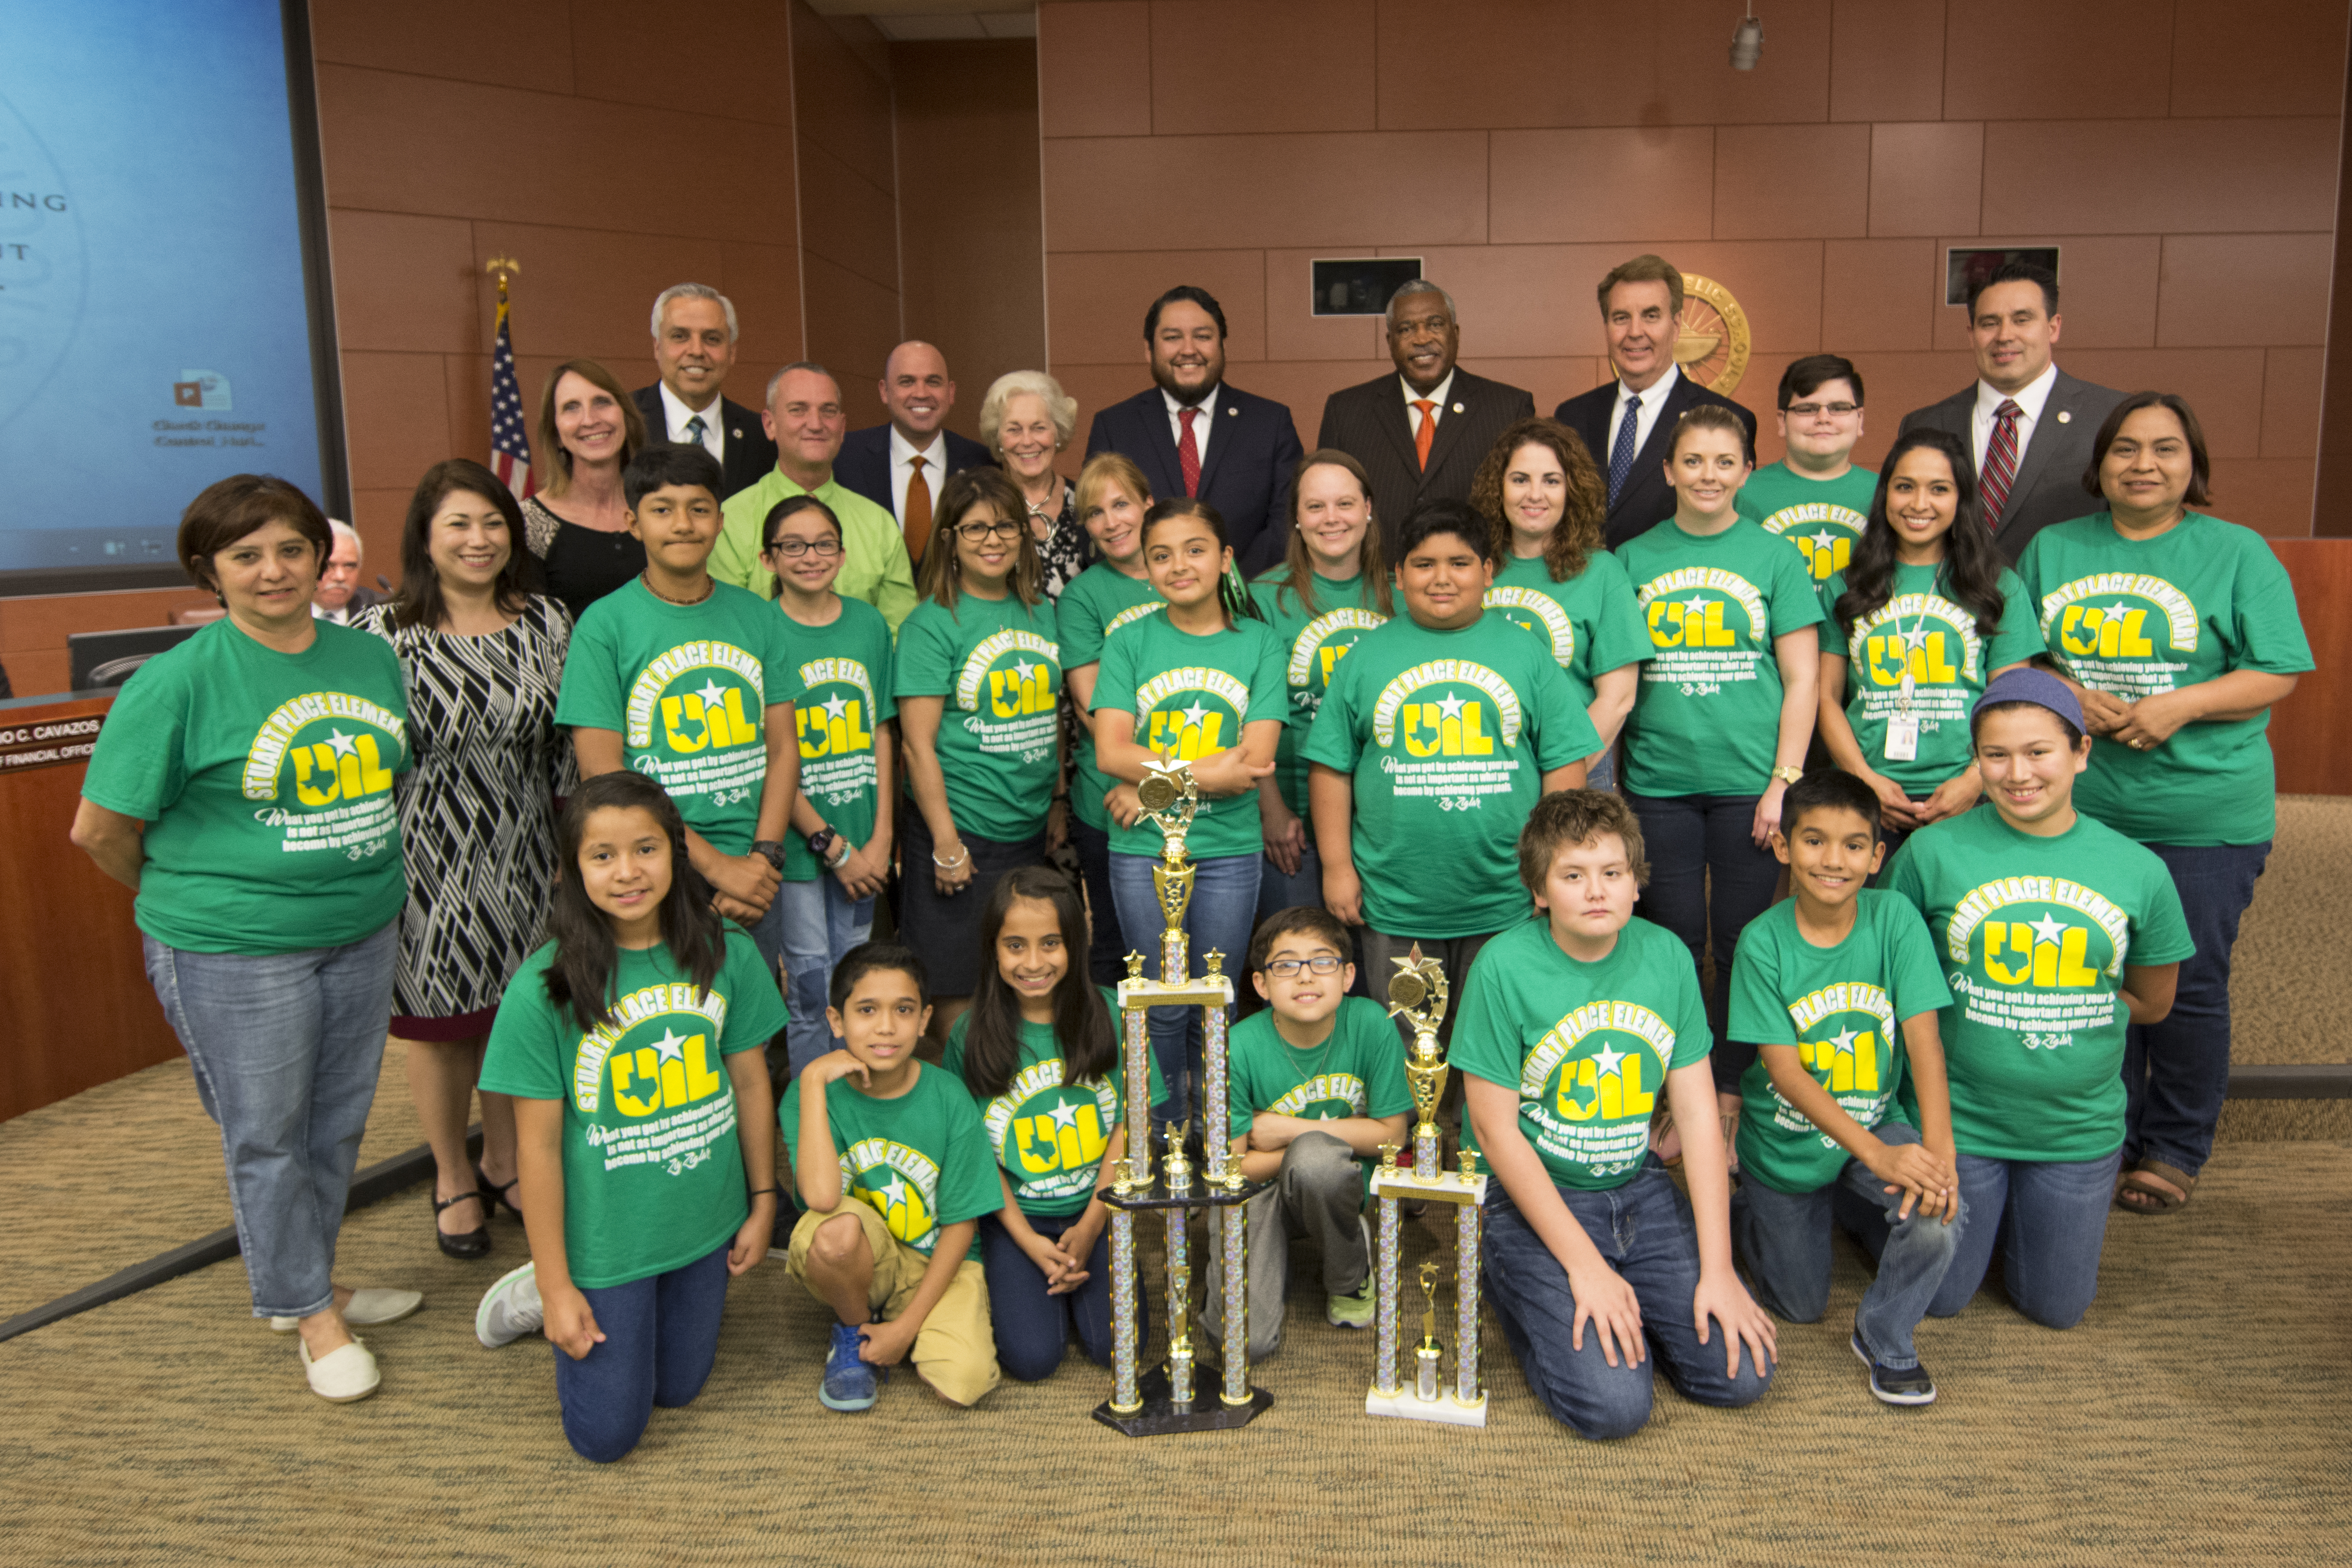 Students compete in 5th annual Elementary UIL District Meet